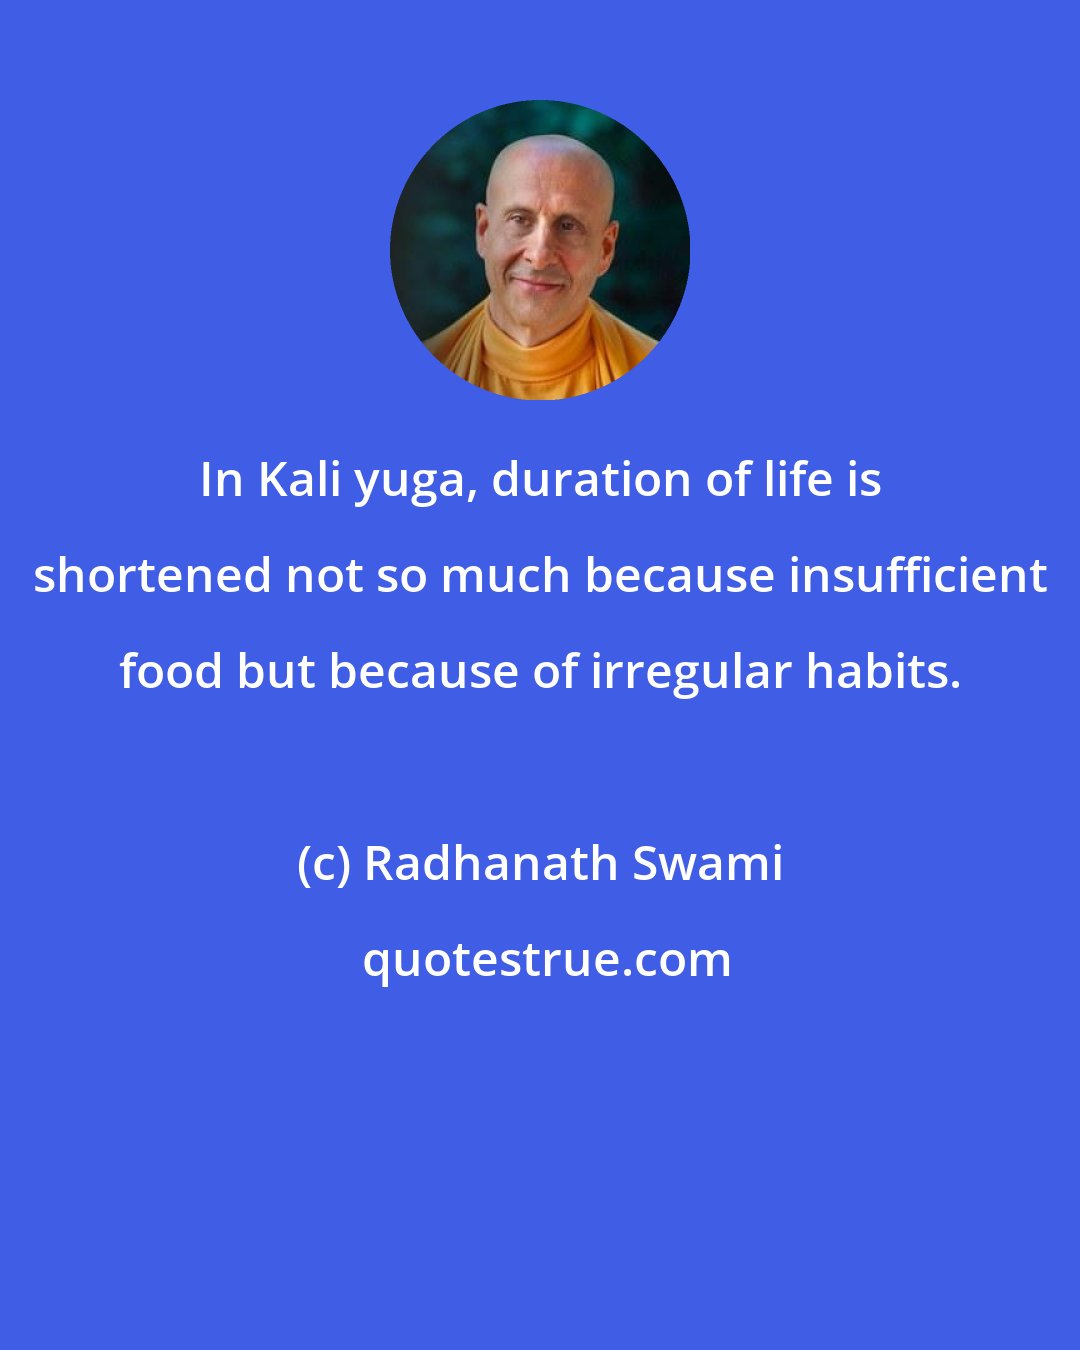 Radhanath Swami: In Kali yuga, duration of life is shortened not so much because insufficient food but because of irregular habits.